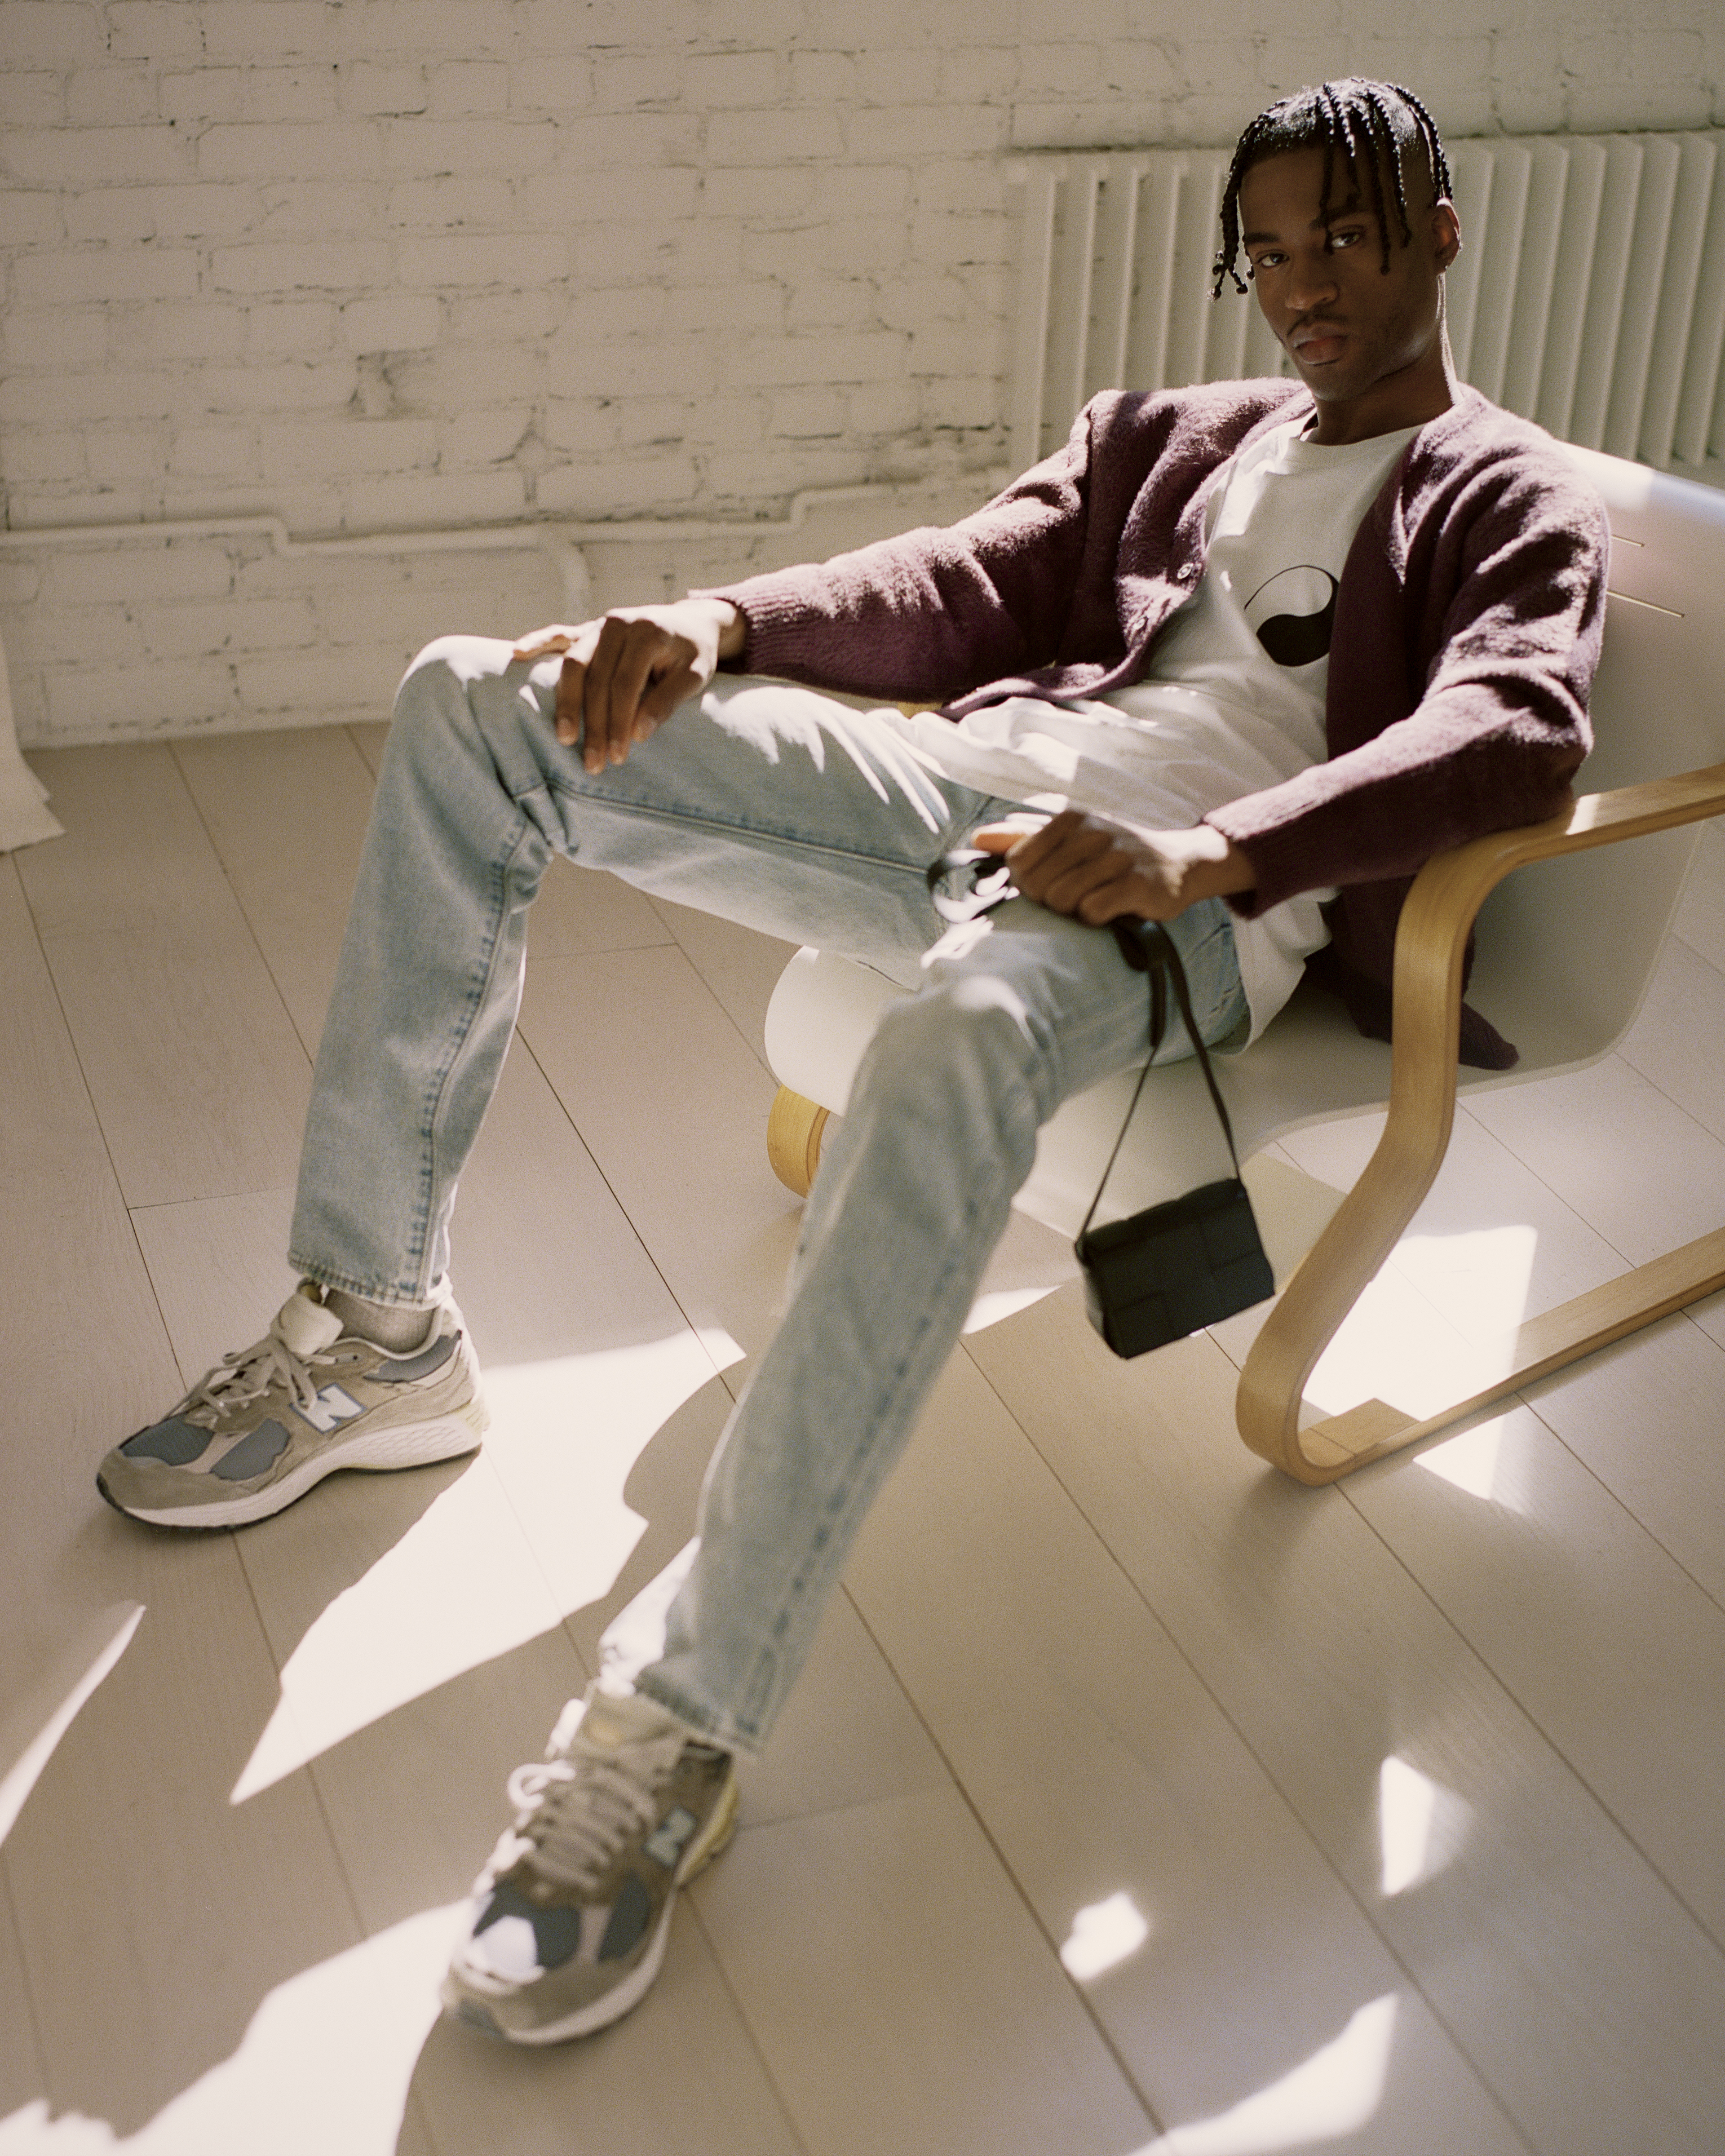 NYC's Aime Leon Dore Win Autumnal Styling with its New Balance  Collaboration Campaign - PLAIN Magazine